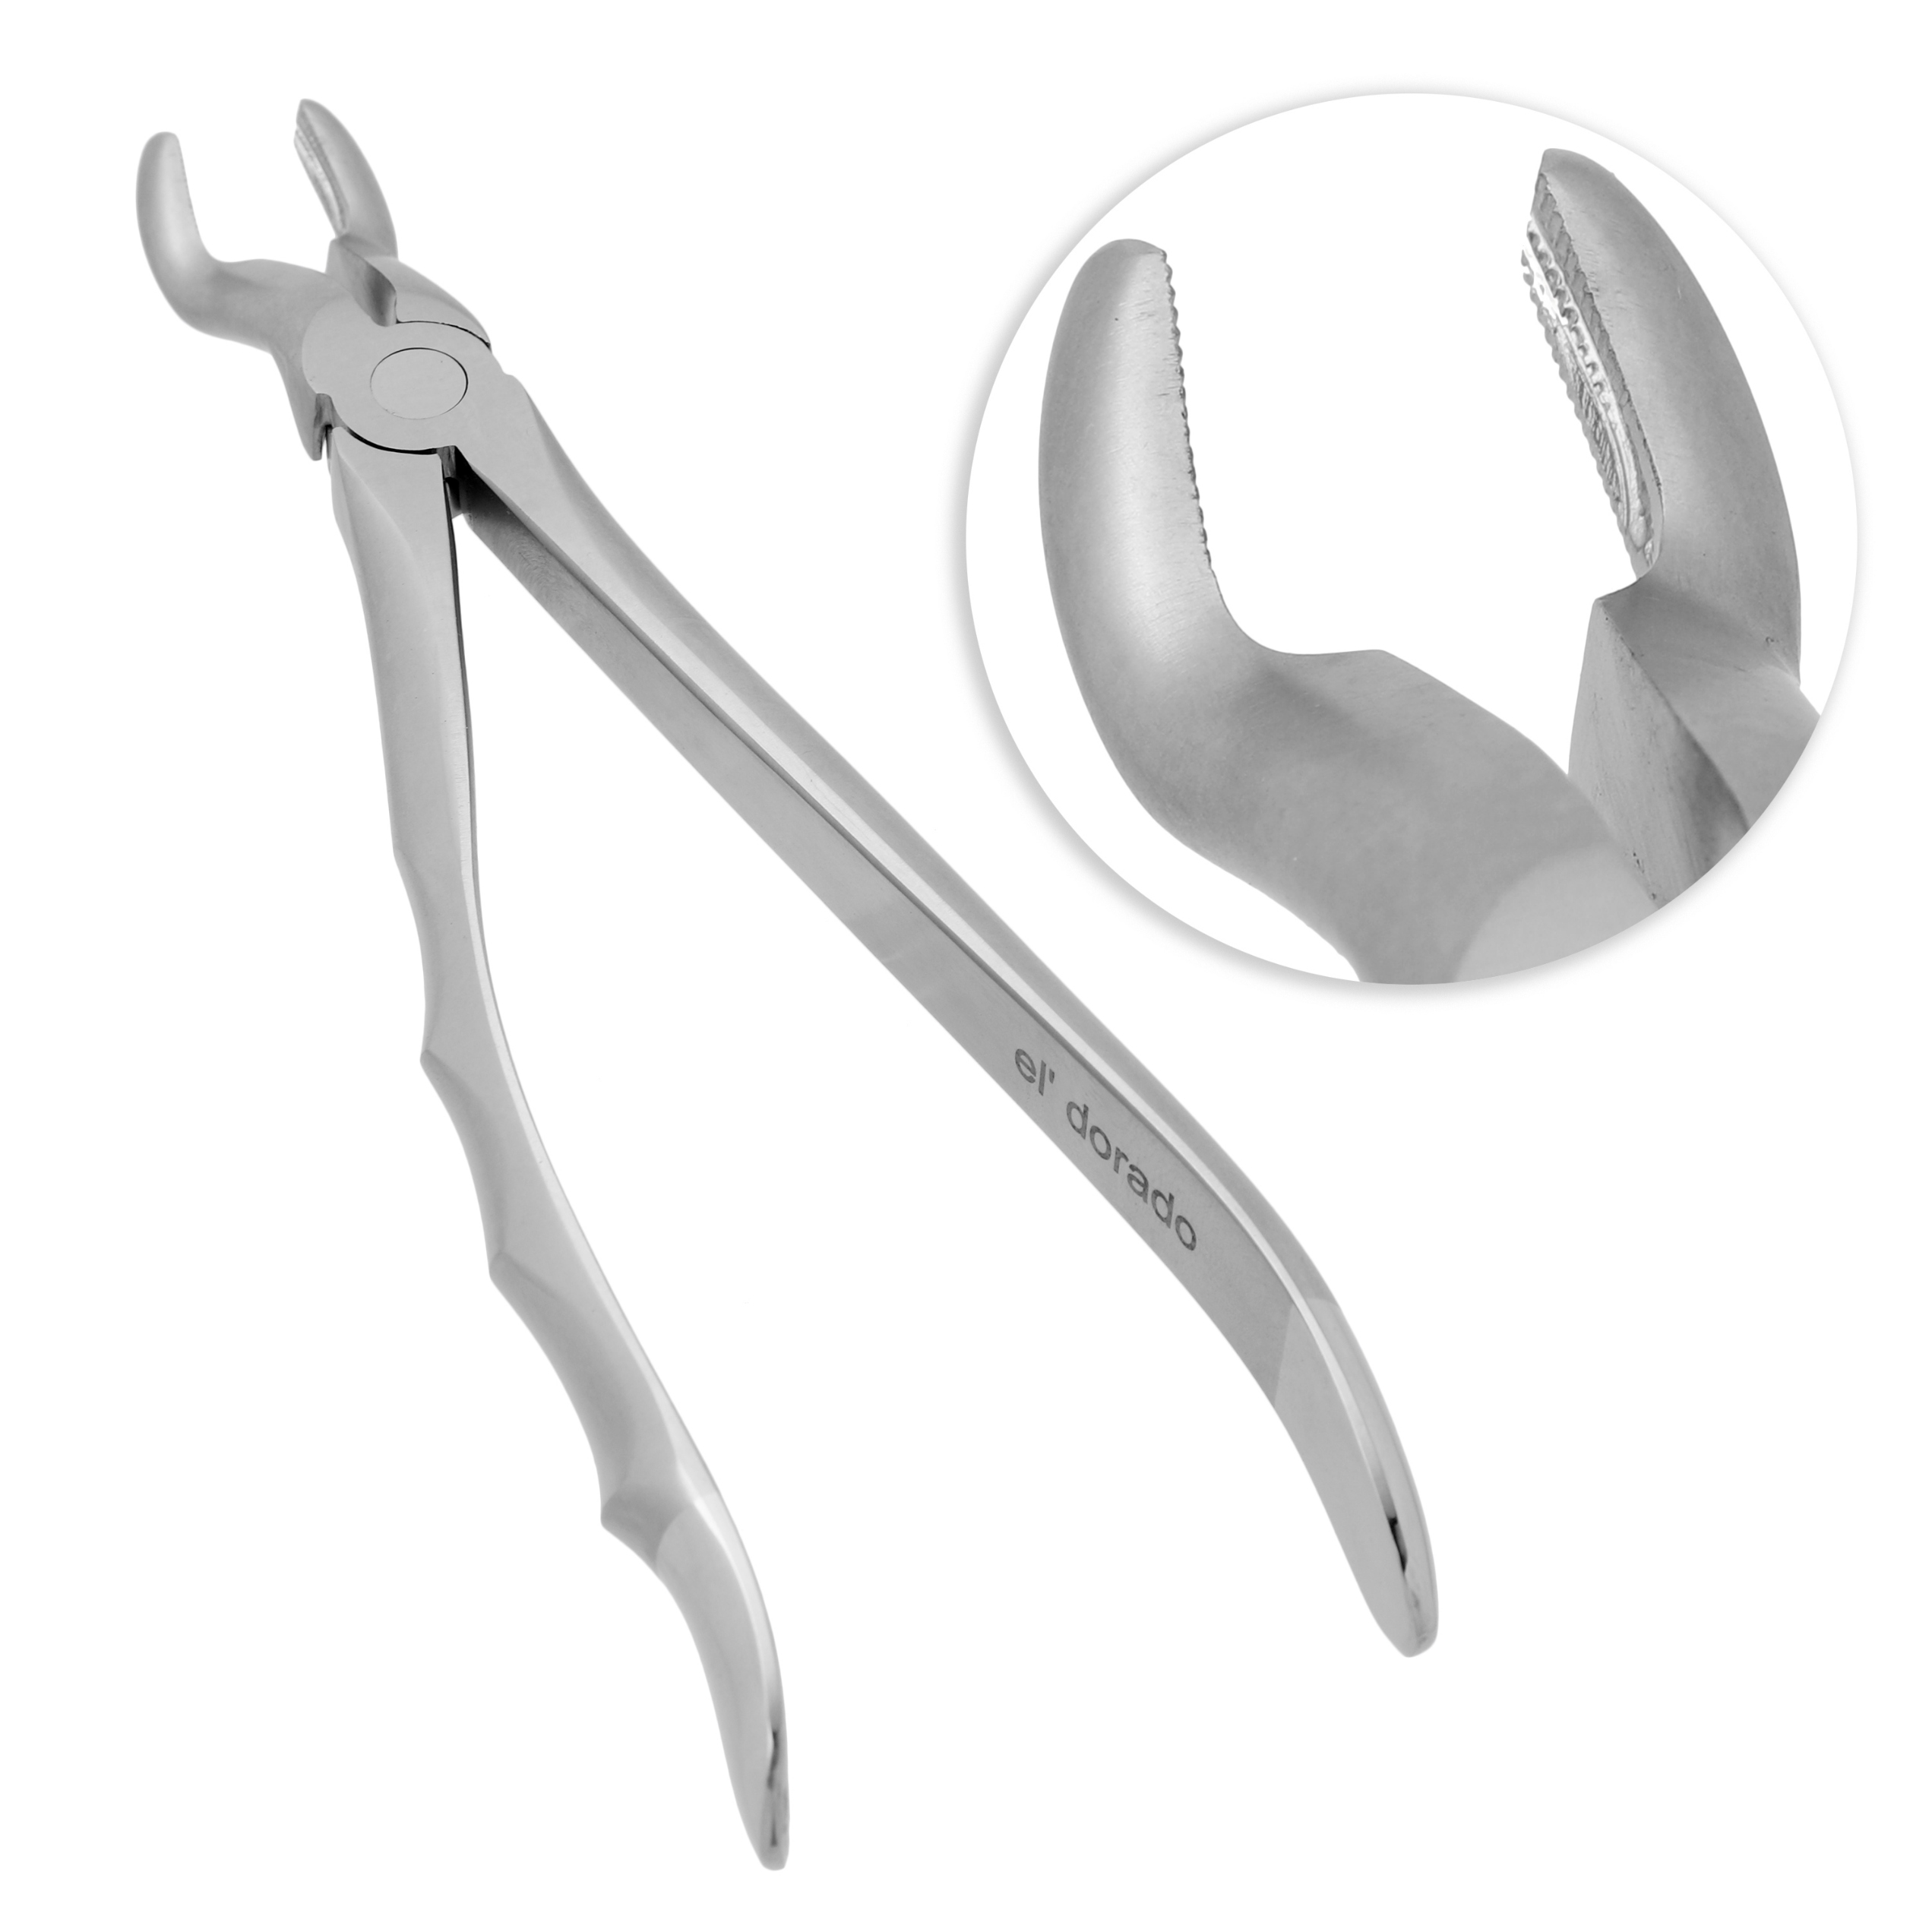 extracting-fingering-forcep-67A(pre).jpg